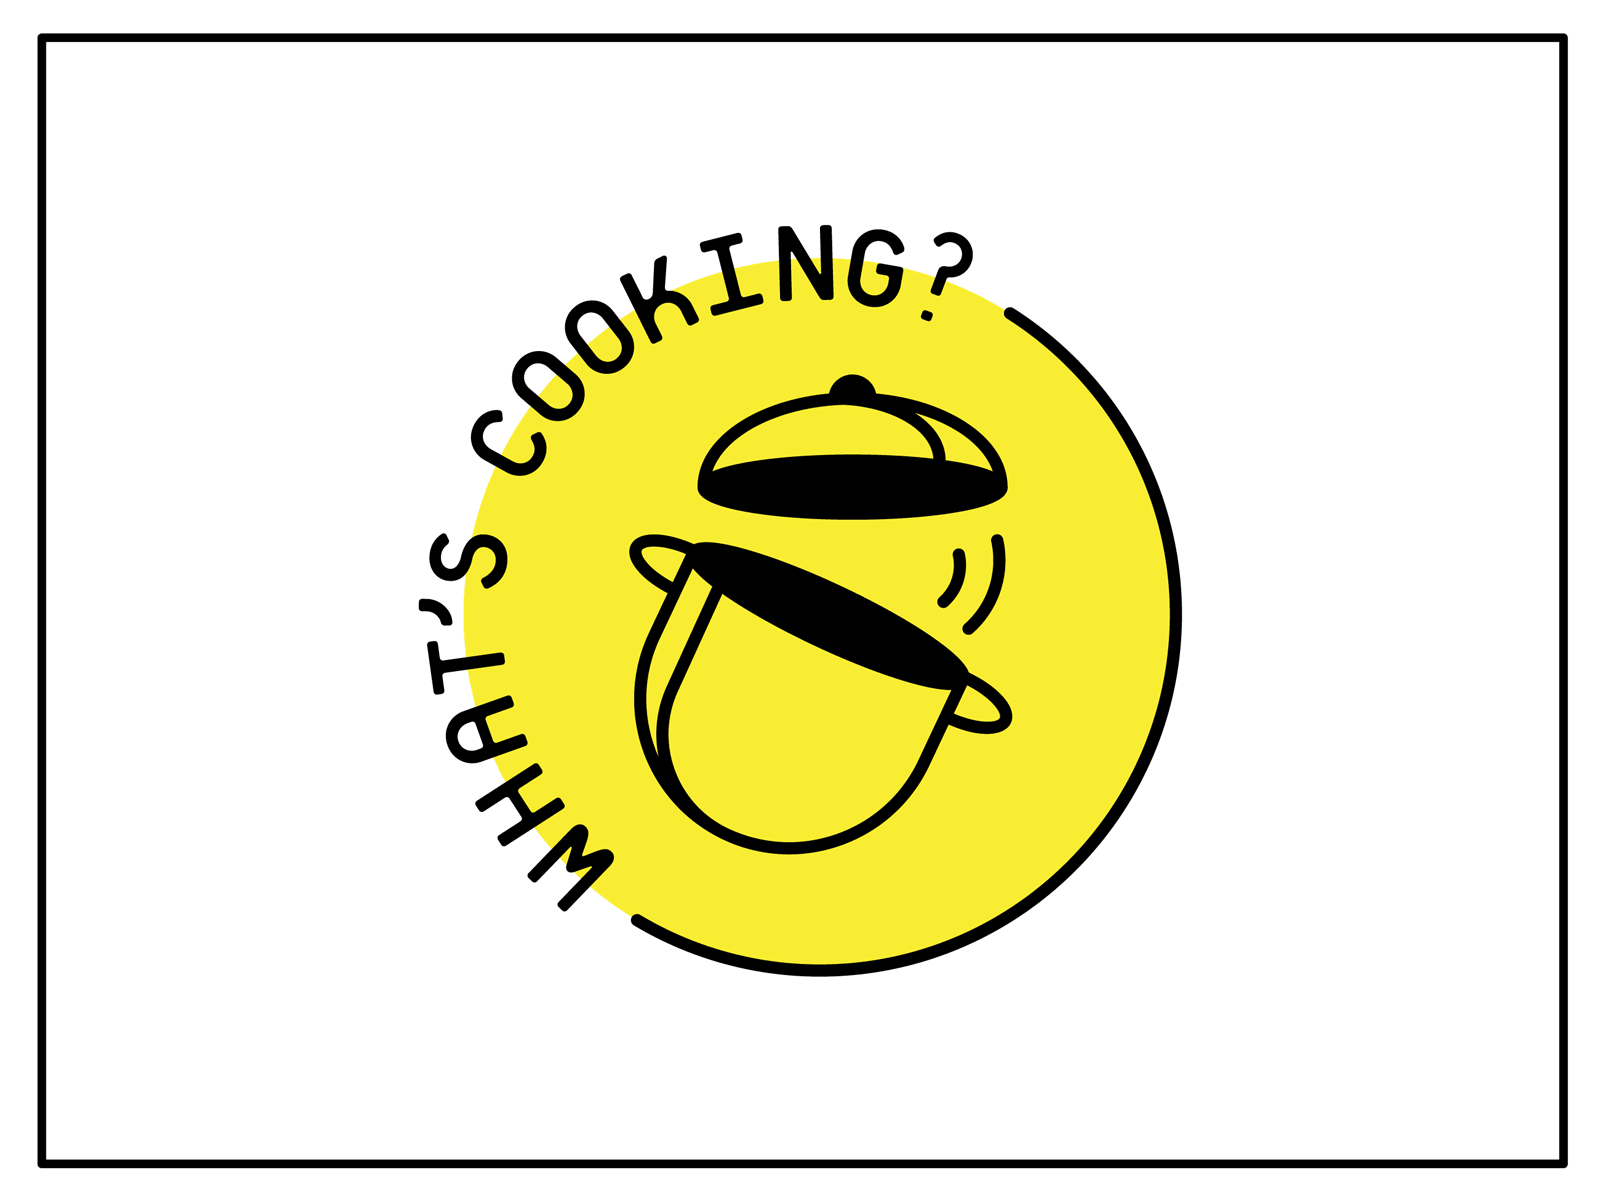 What's Cooking? brand identity branding cooking food fried rice identity illustration logo pasta pattern pot seal style styleguide whats cooking